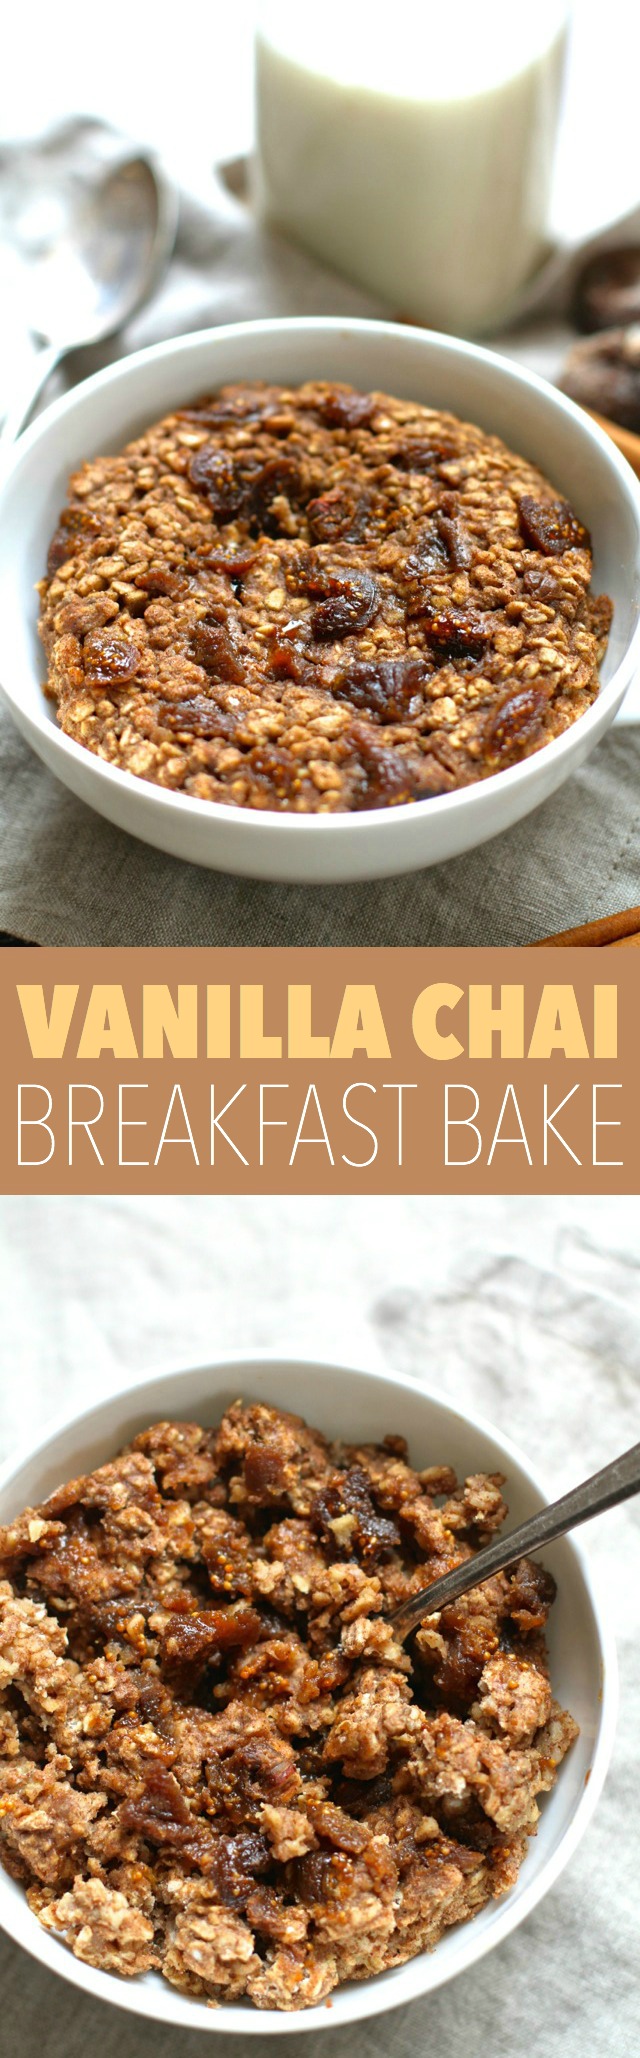 Vanilla Chai Breakfast Bake -- the PERFECT way to spice up your breakfast rotation! Soft, doughy, and loaded with flavour || runningwithspoons.com #vegan #glutenfree #breakfast #recipe #healthy